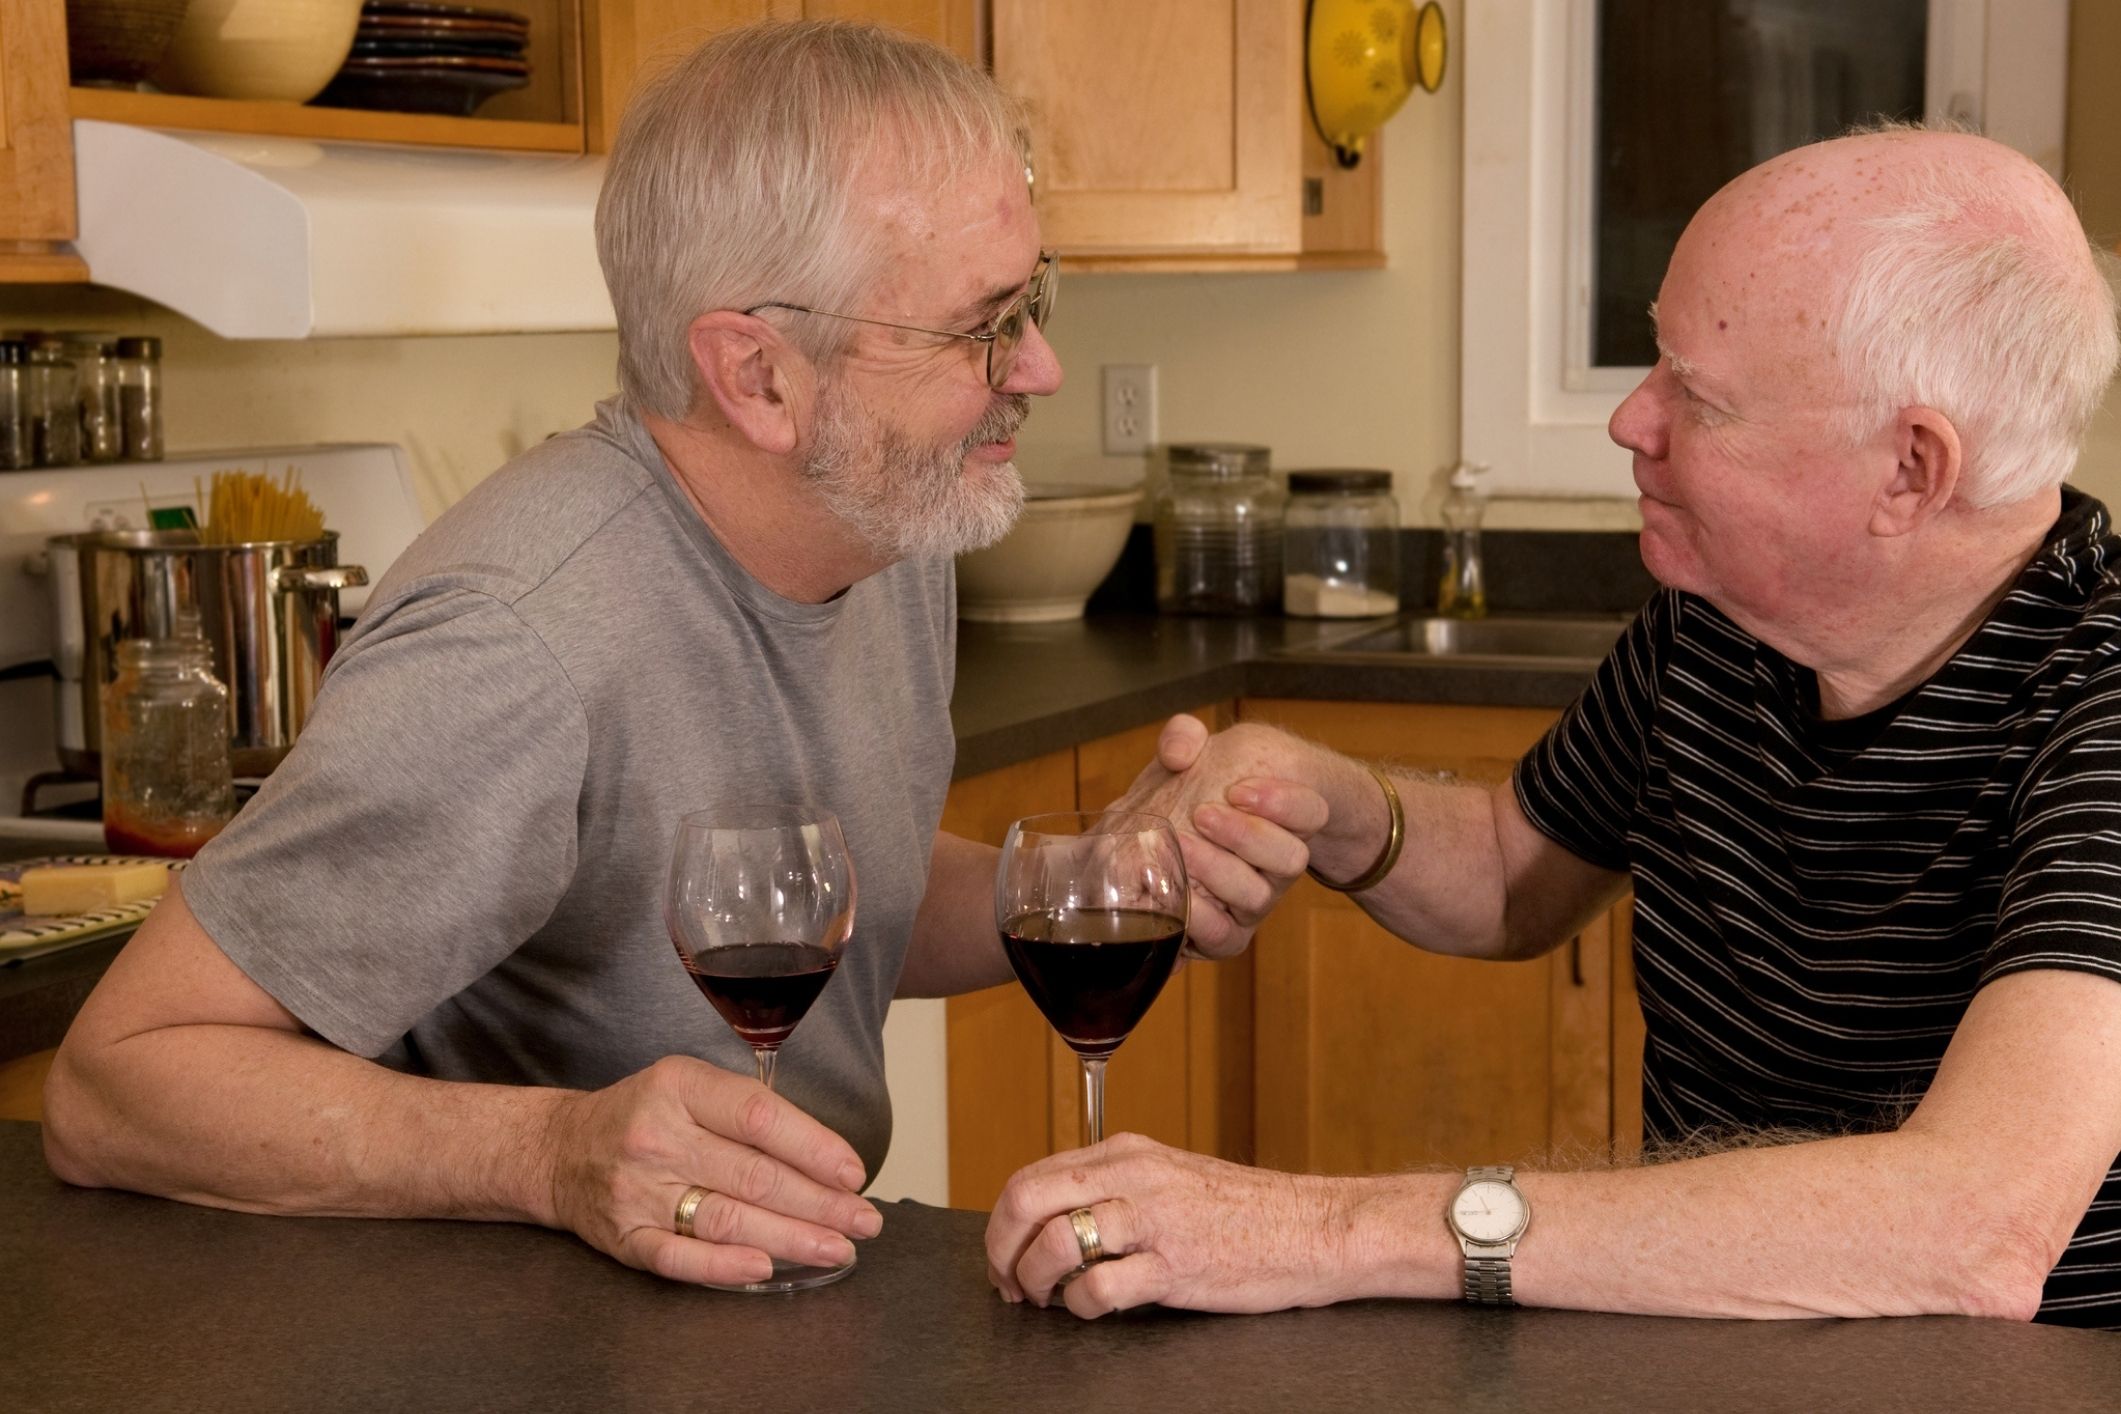 Elderly gay couple decide to leave their Toowoomba home after years of abuse